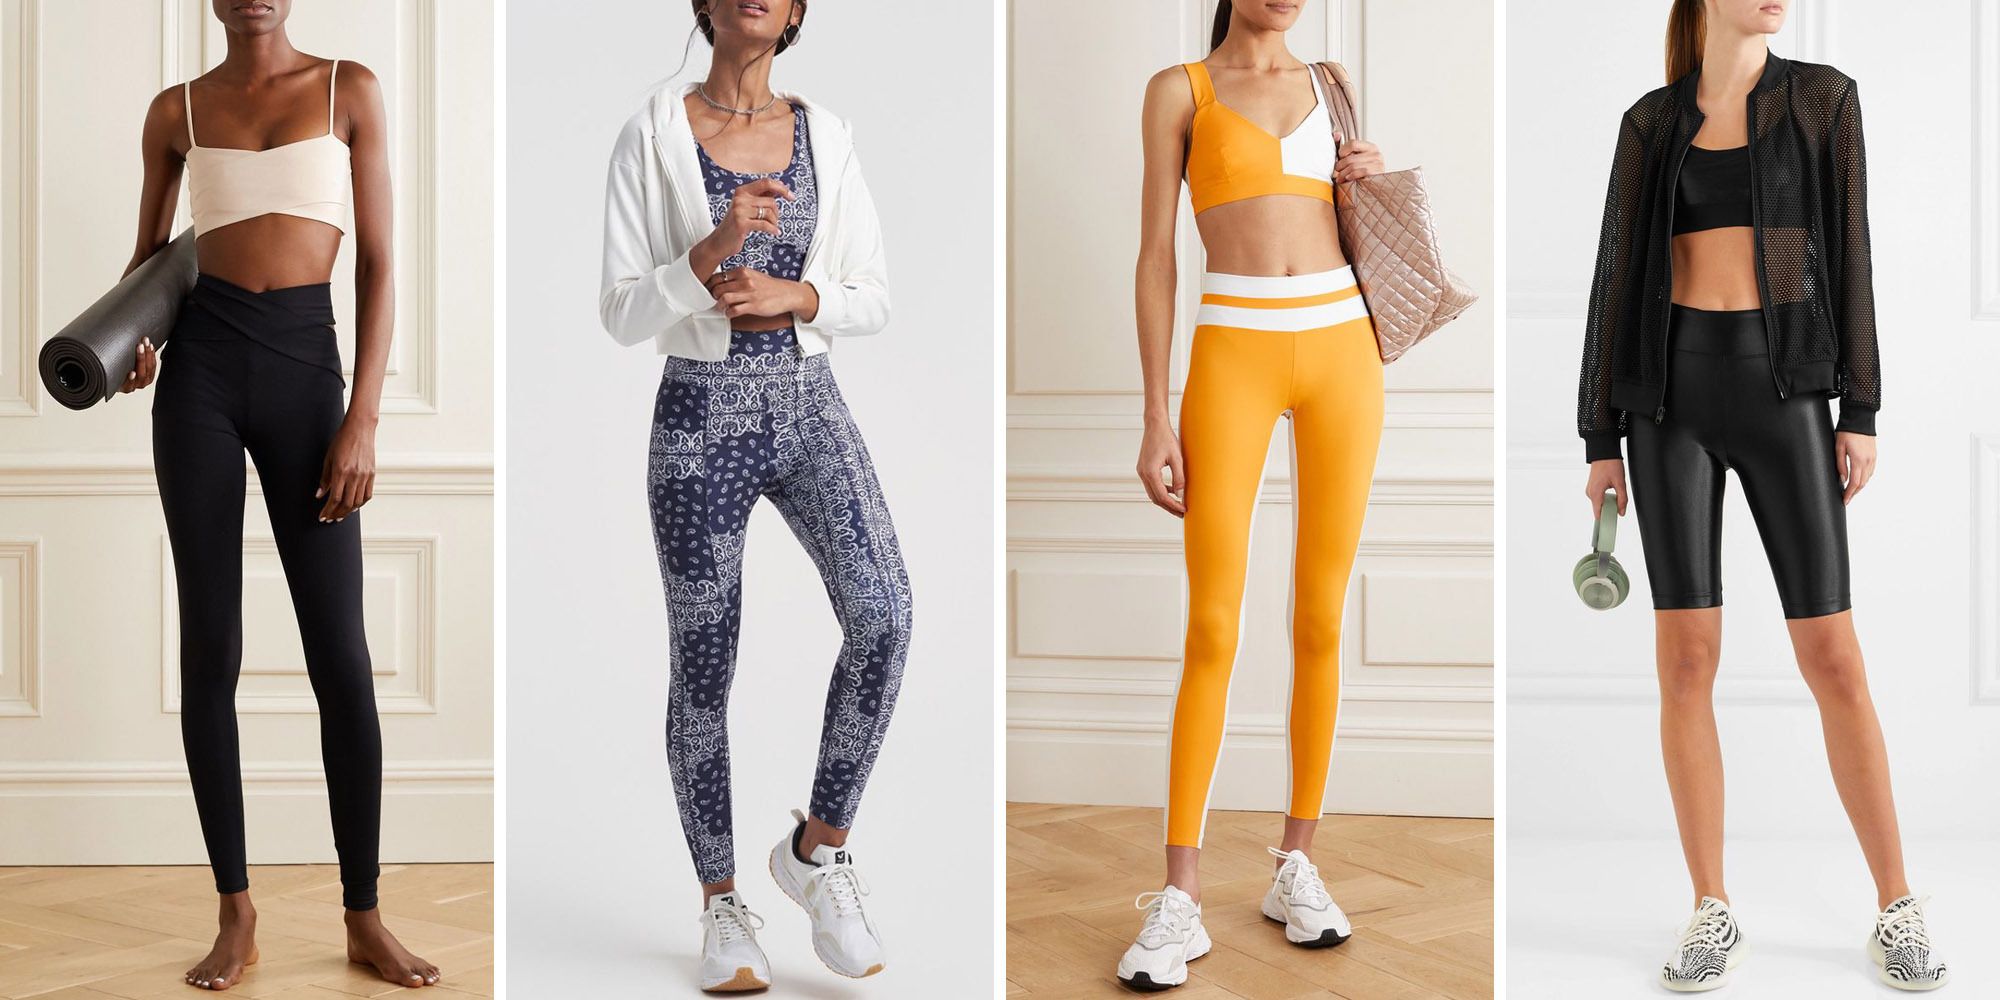 Women's Activewear - Stylish and Snazzy Sports Apparel For Women